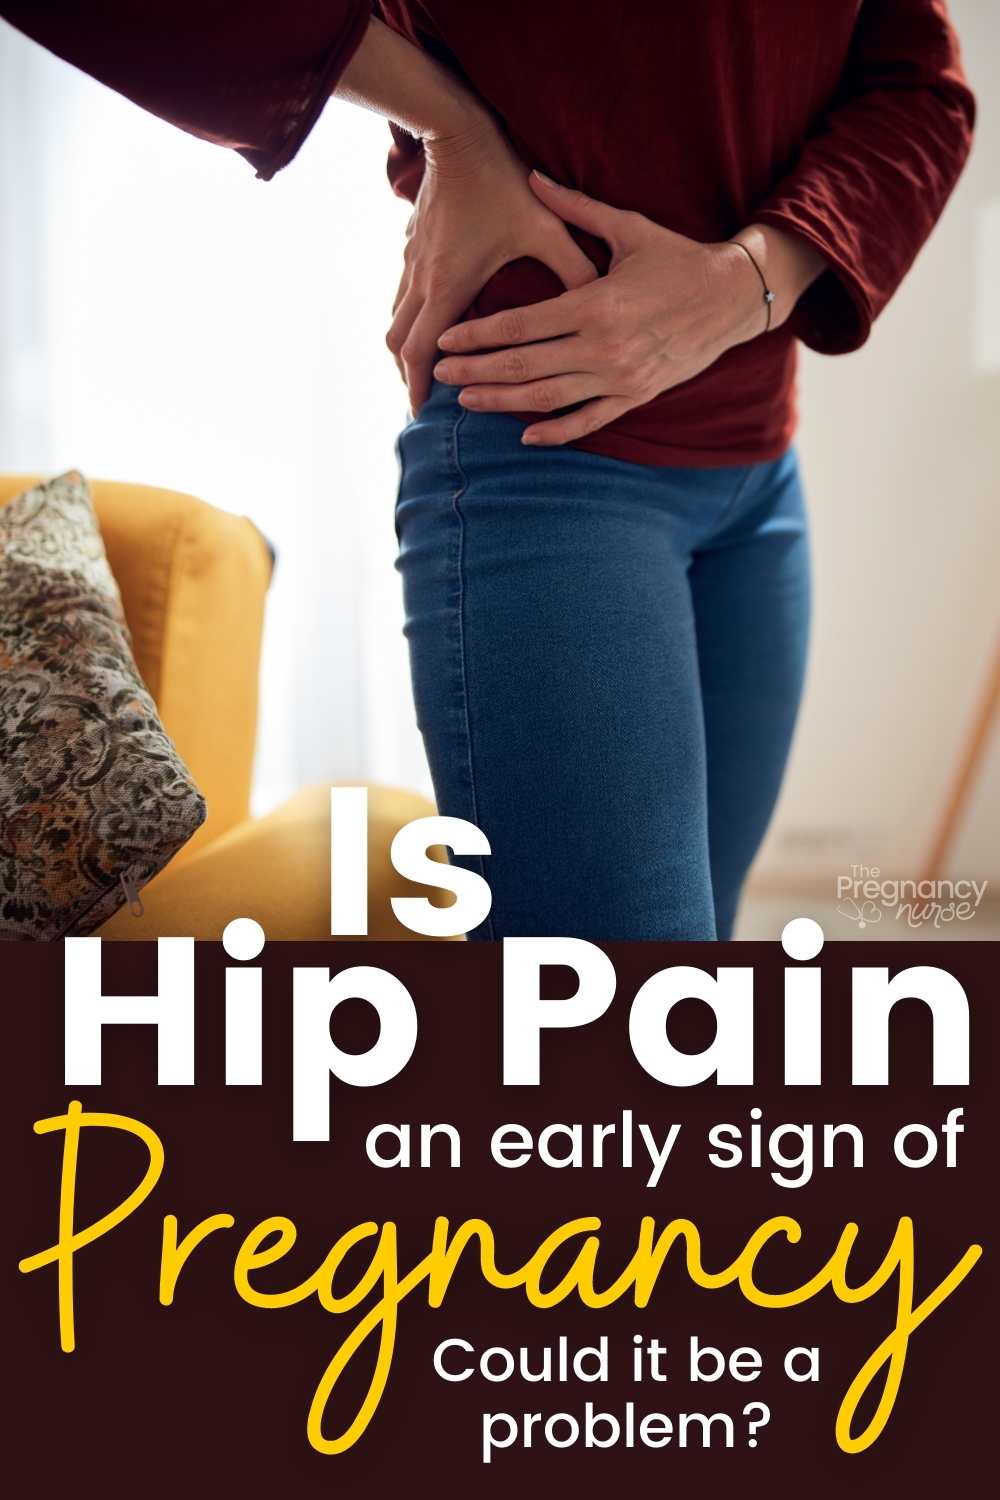 During pregnancy, you may experience some aches or pains in your hip or pelvic region. It can be difficult to pinpoint the exact problem, but we're here to help! In this post, we describe some of the causes and common symptoms of hip and pelvic pain, and offer some tips on how you can relieve or prevent the pain. Make sure to tell your doctor about any pain that disrupts your daily life, that gets worse over time, or that feels severe. Let your doctor know if you feel light-headed, or if you have vaginal bleeding or a fever as well as pain. If you experience hip pain